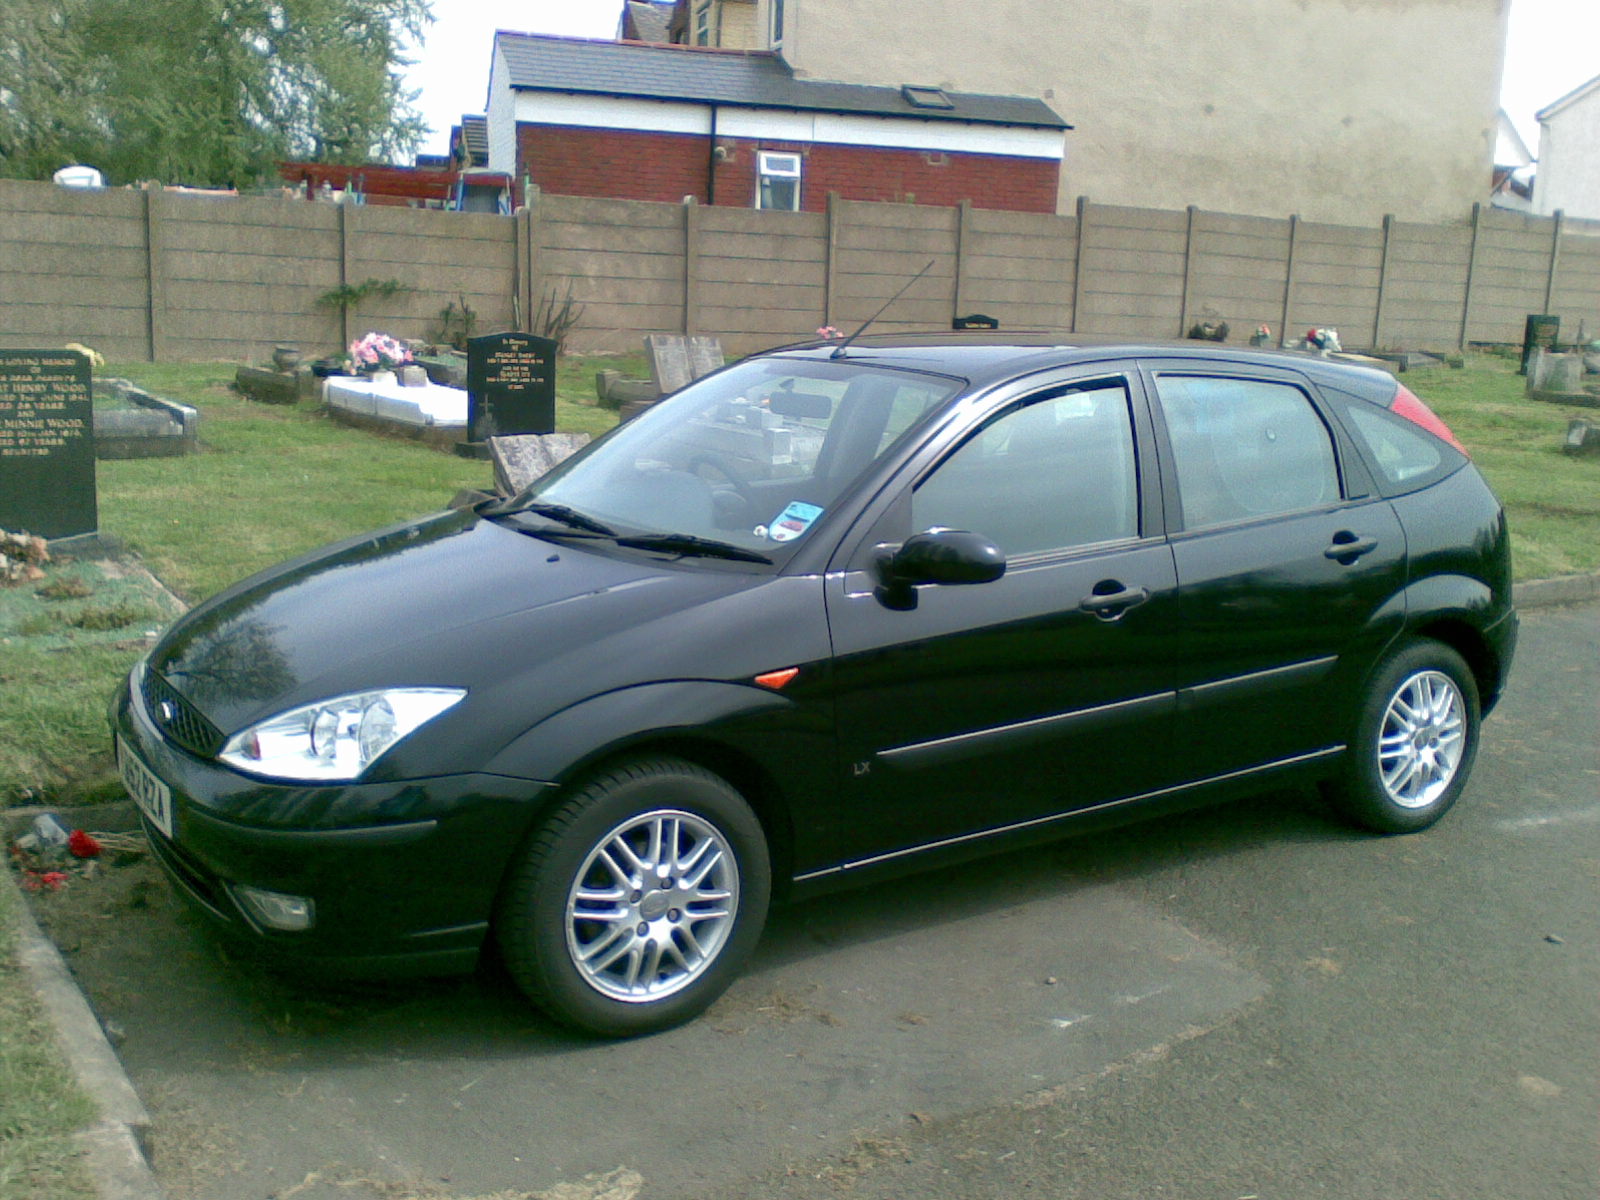 Ford fiesta lx review 2003 #3